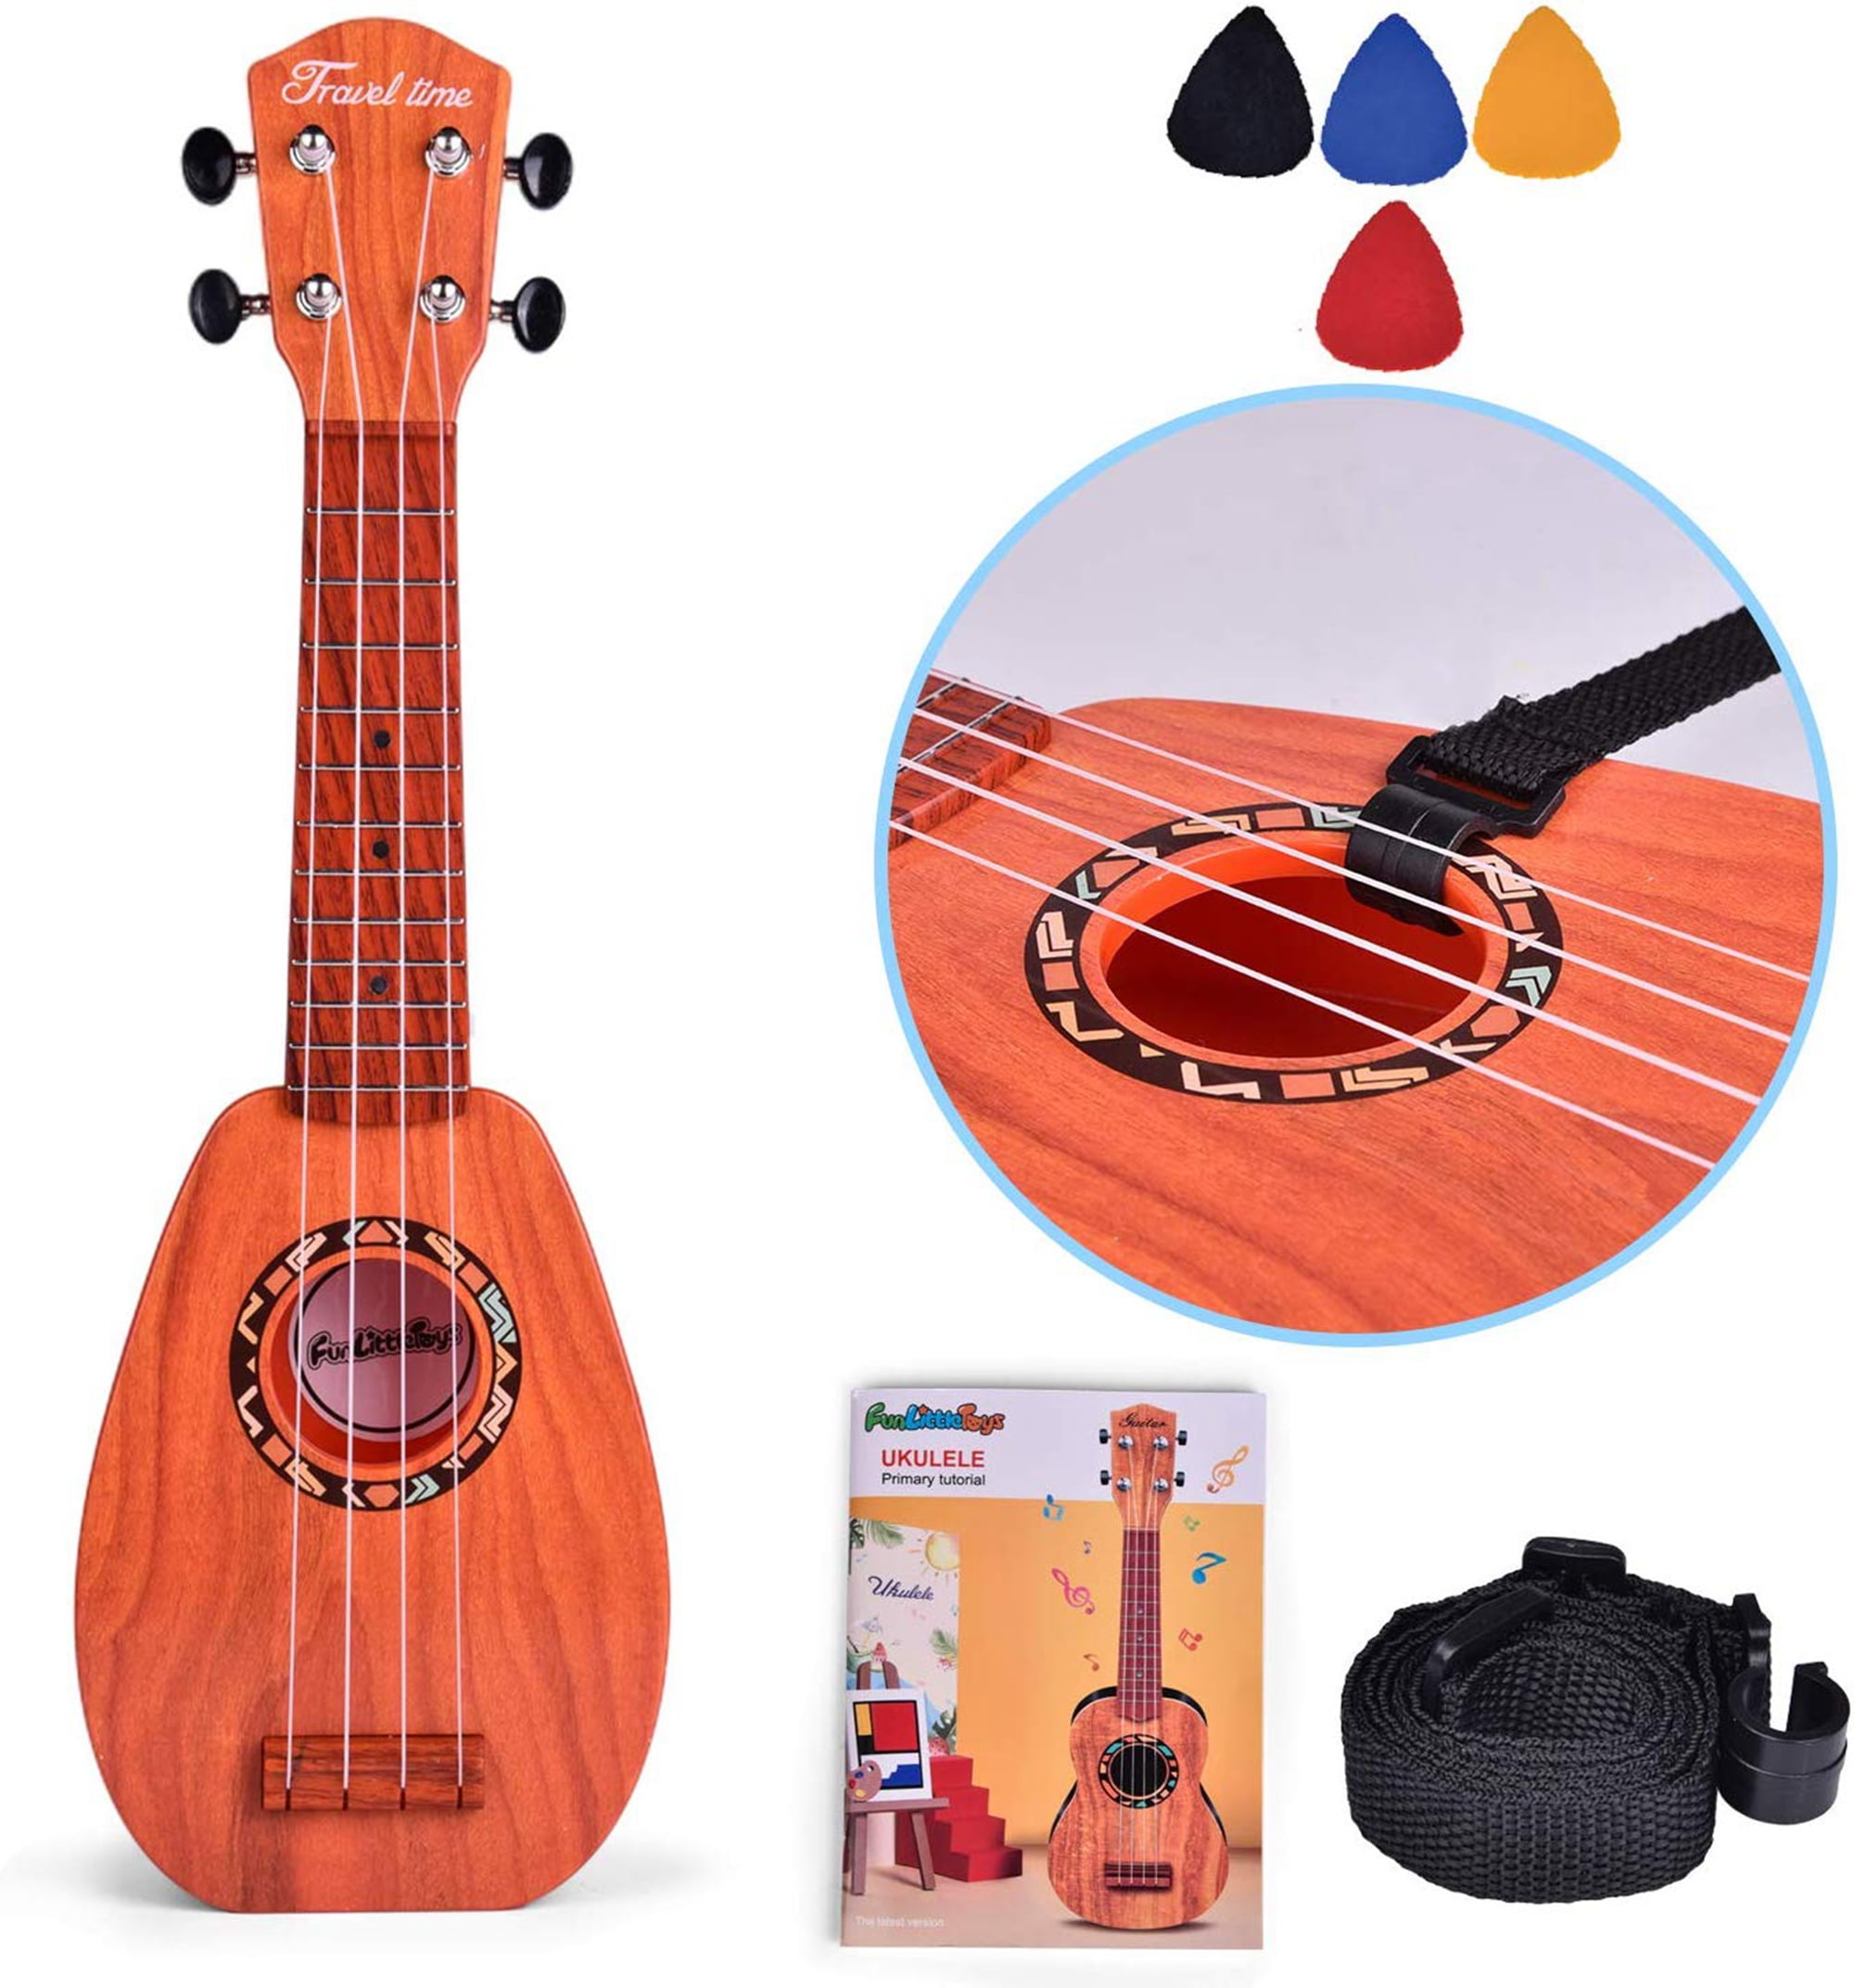 Music Instrument for kids Toy Guitar Ukulele 17 Inch educational Toy Guitar 